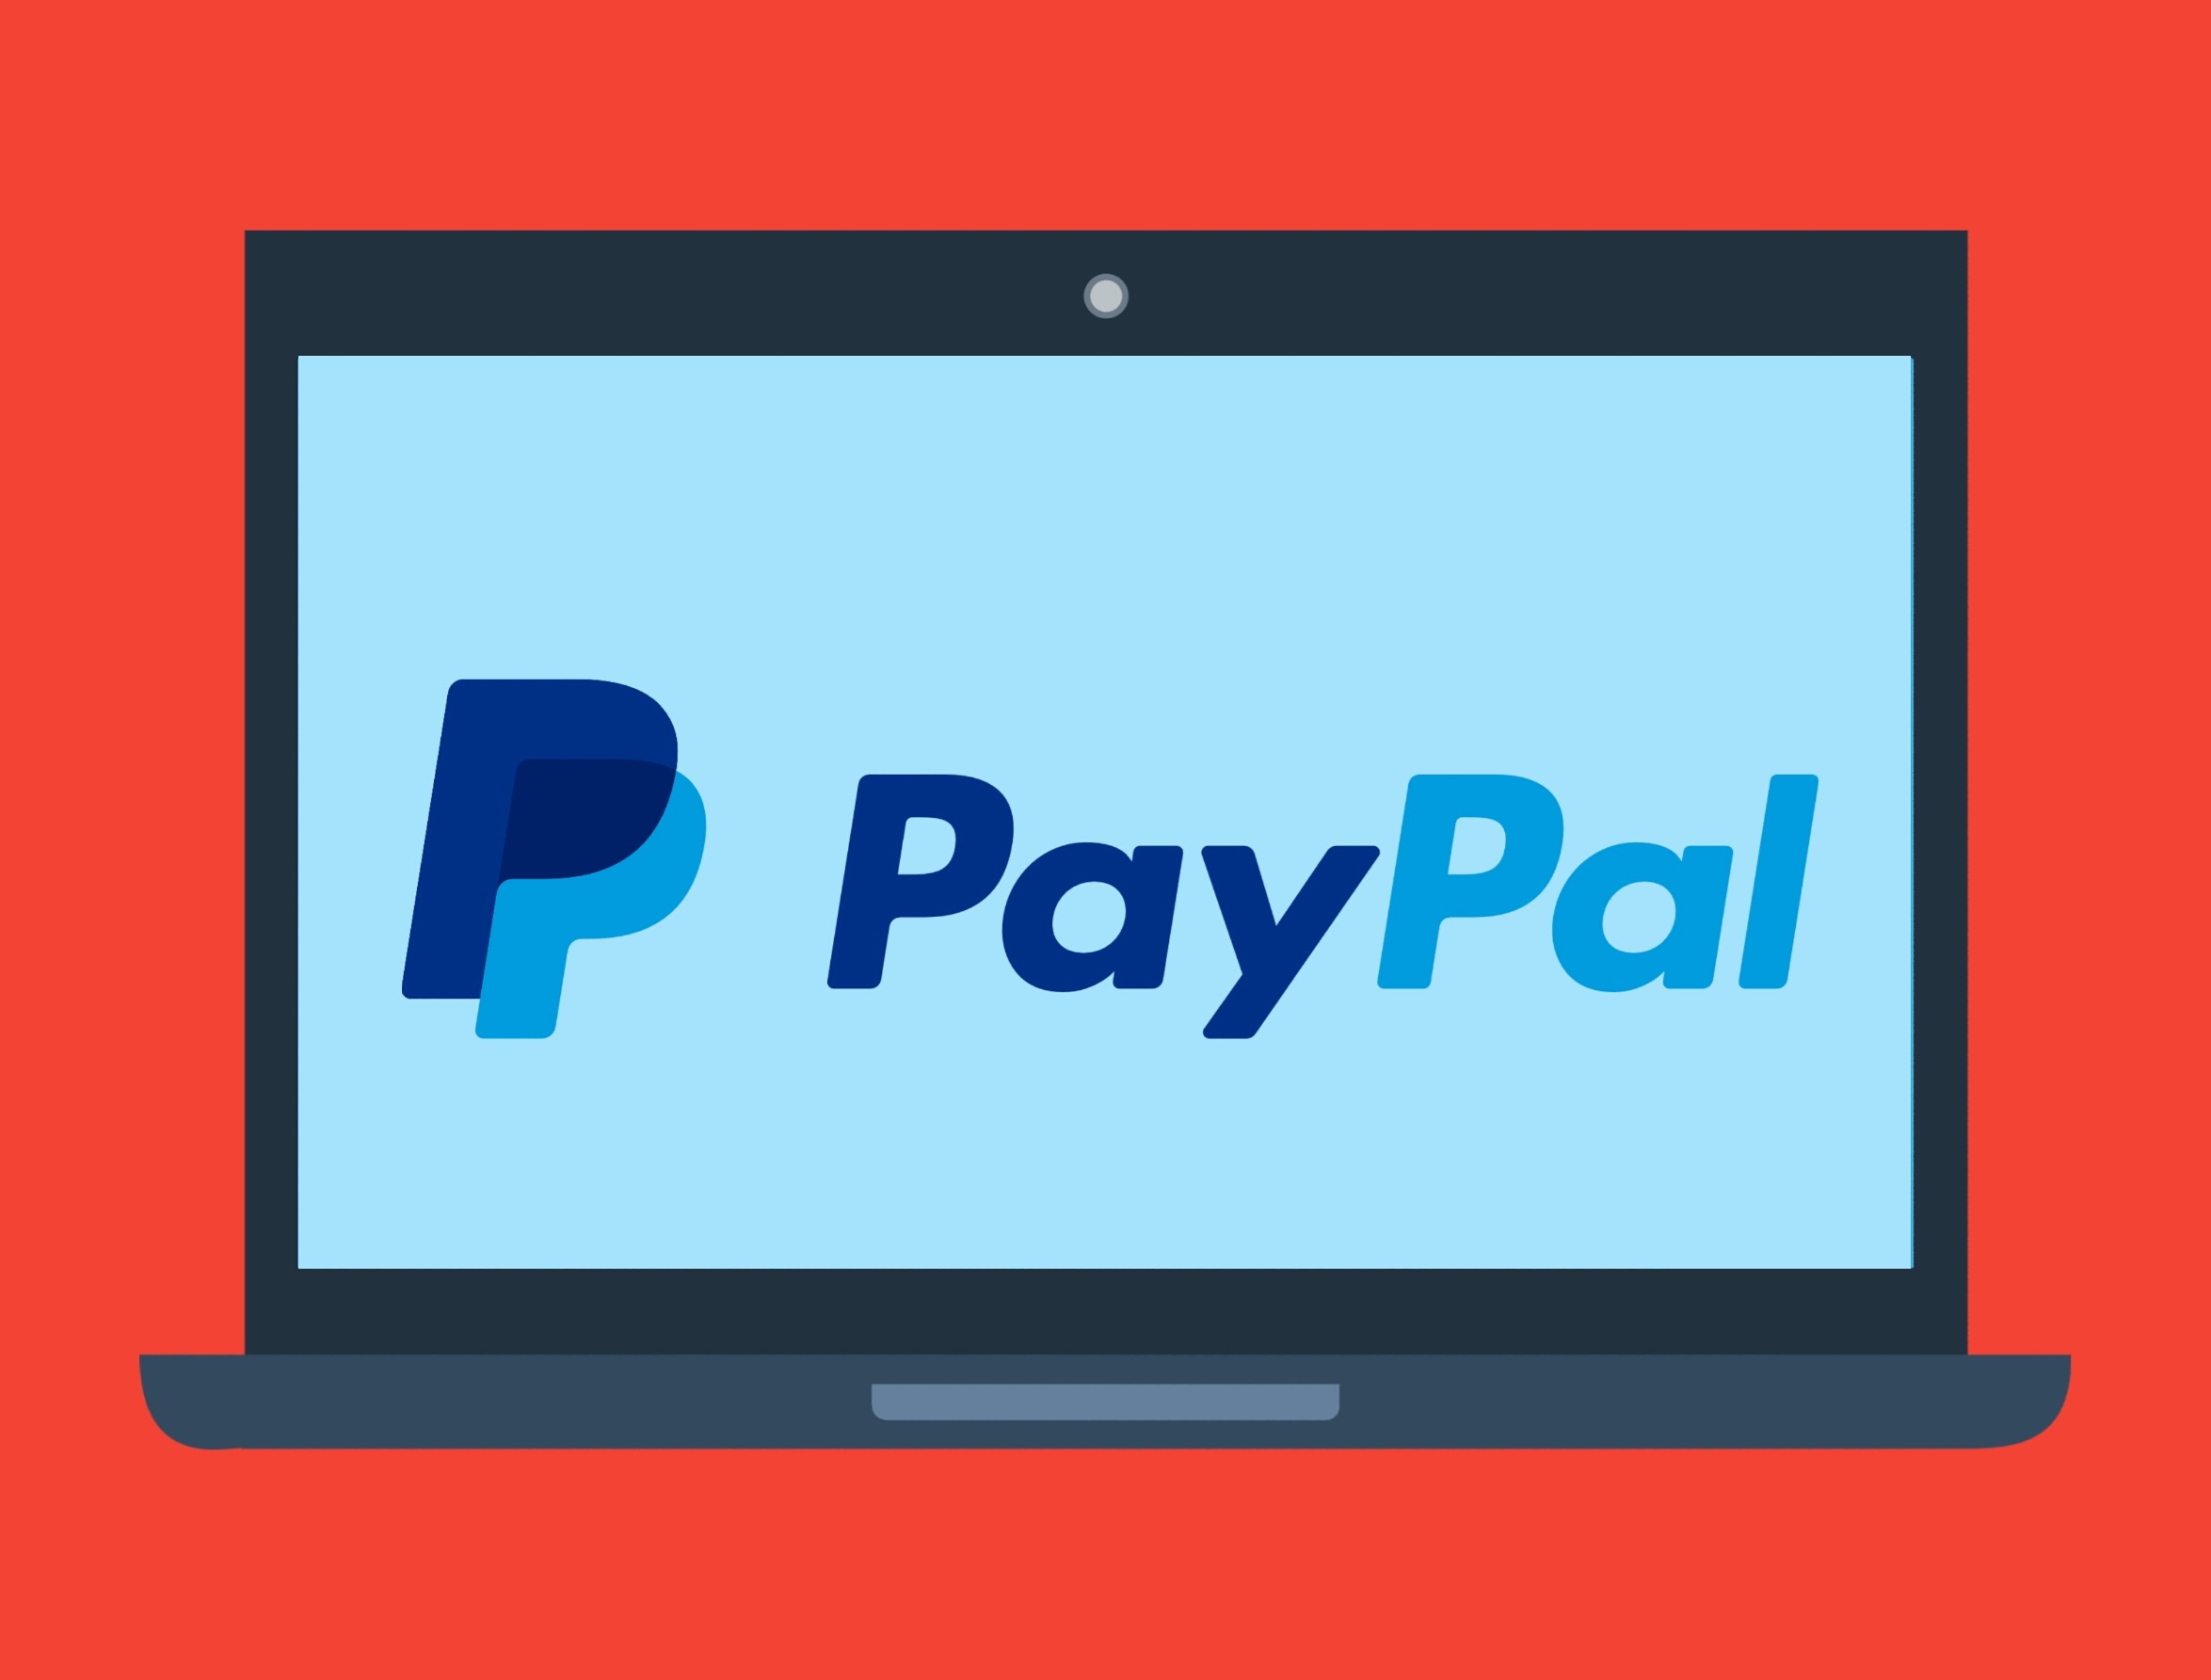 does paypal charge a fee for receiving money